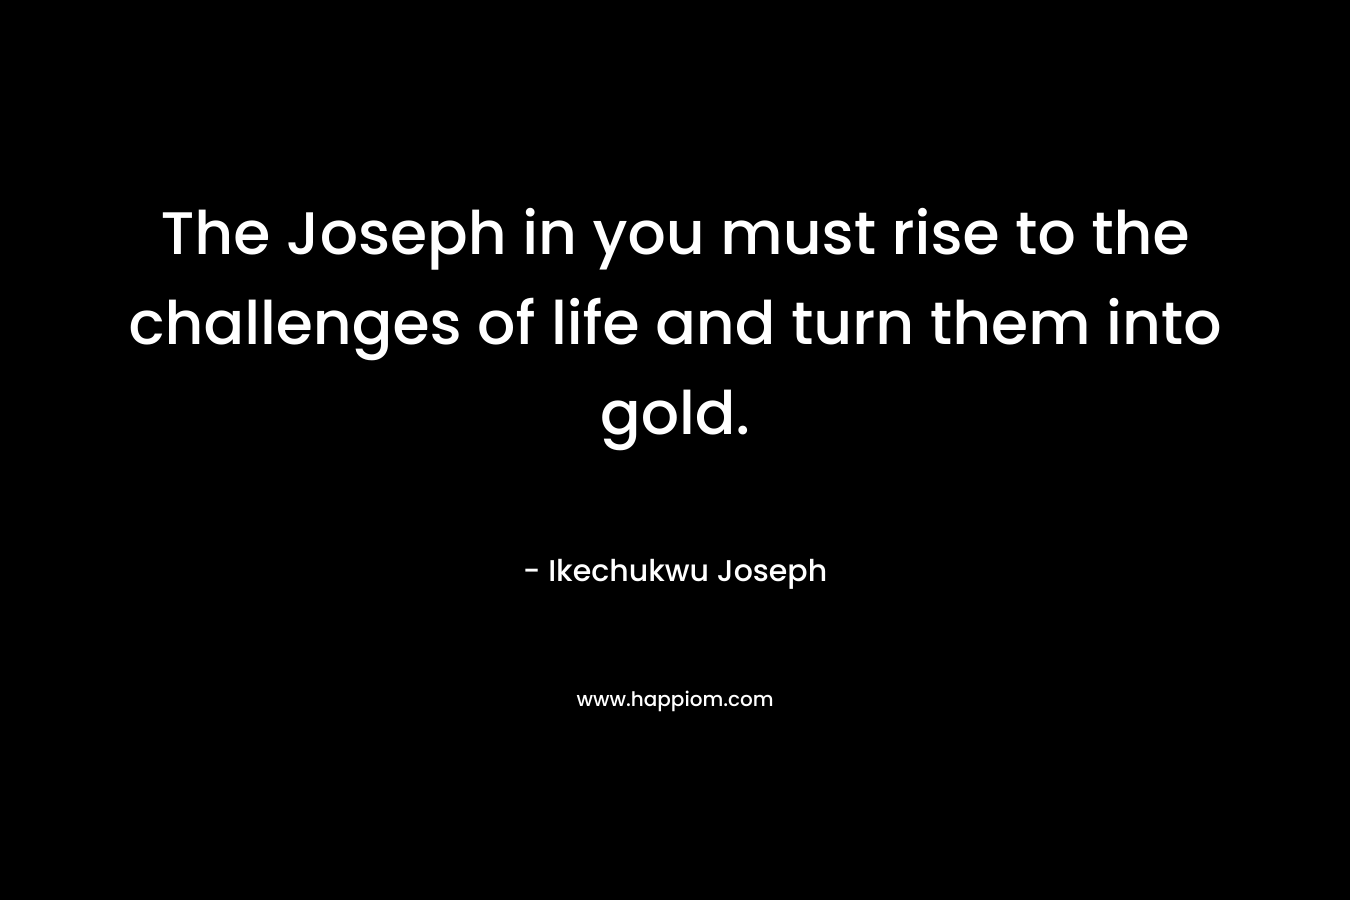 The Joseph in you must rise to the challenges of life and turn them into gold.